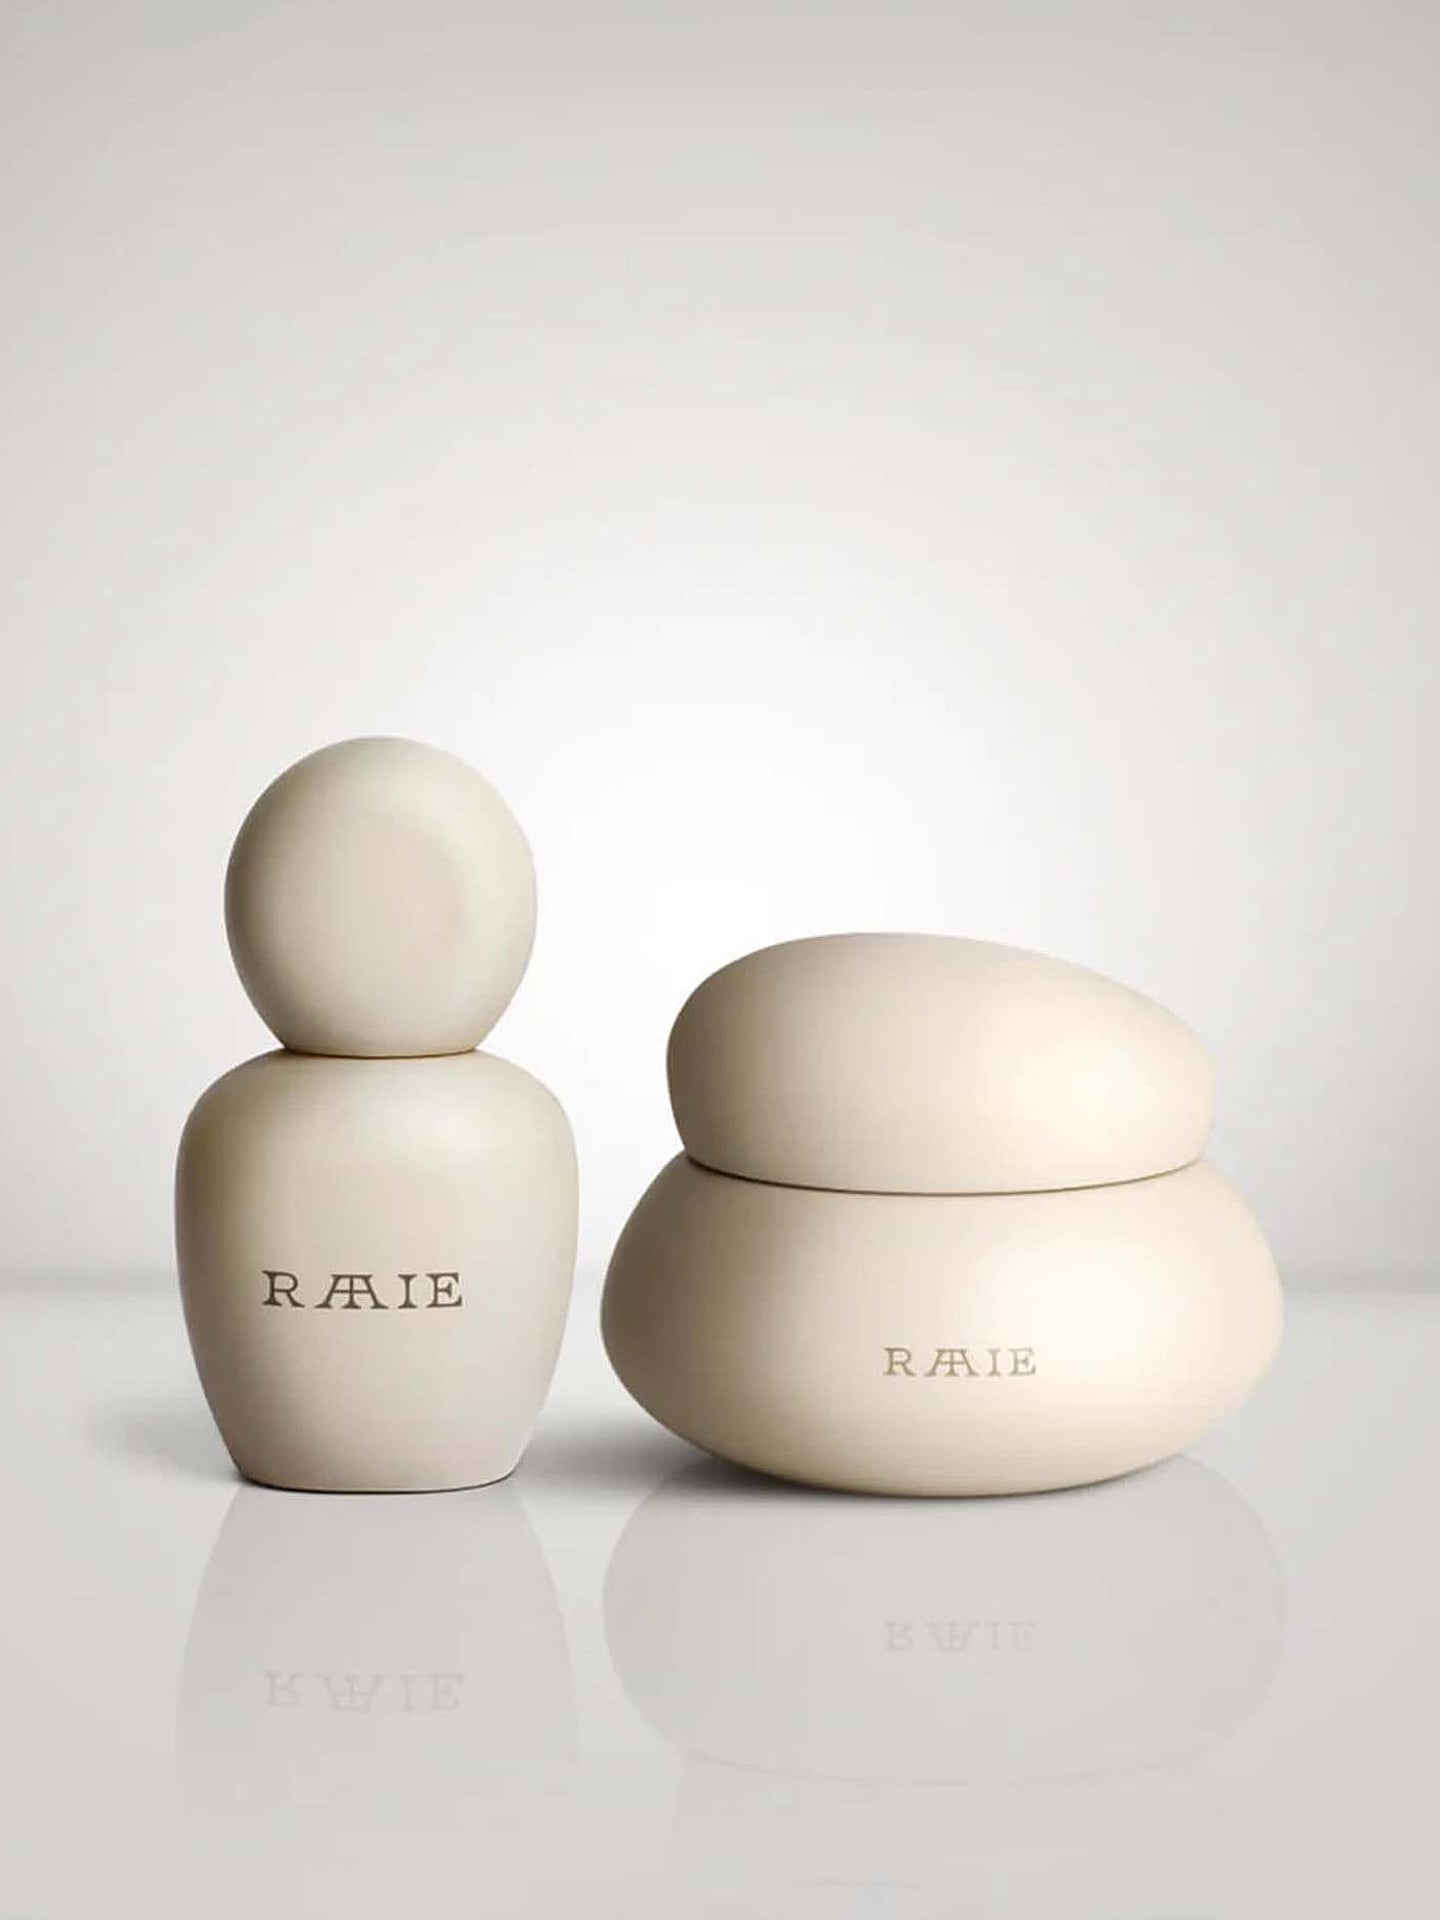 Two beige, uniquely shaped cosmetic containers with the brand name "RAAIE" boast their Bakuchiol-infused formula on a reflective surface against a plain background.